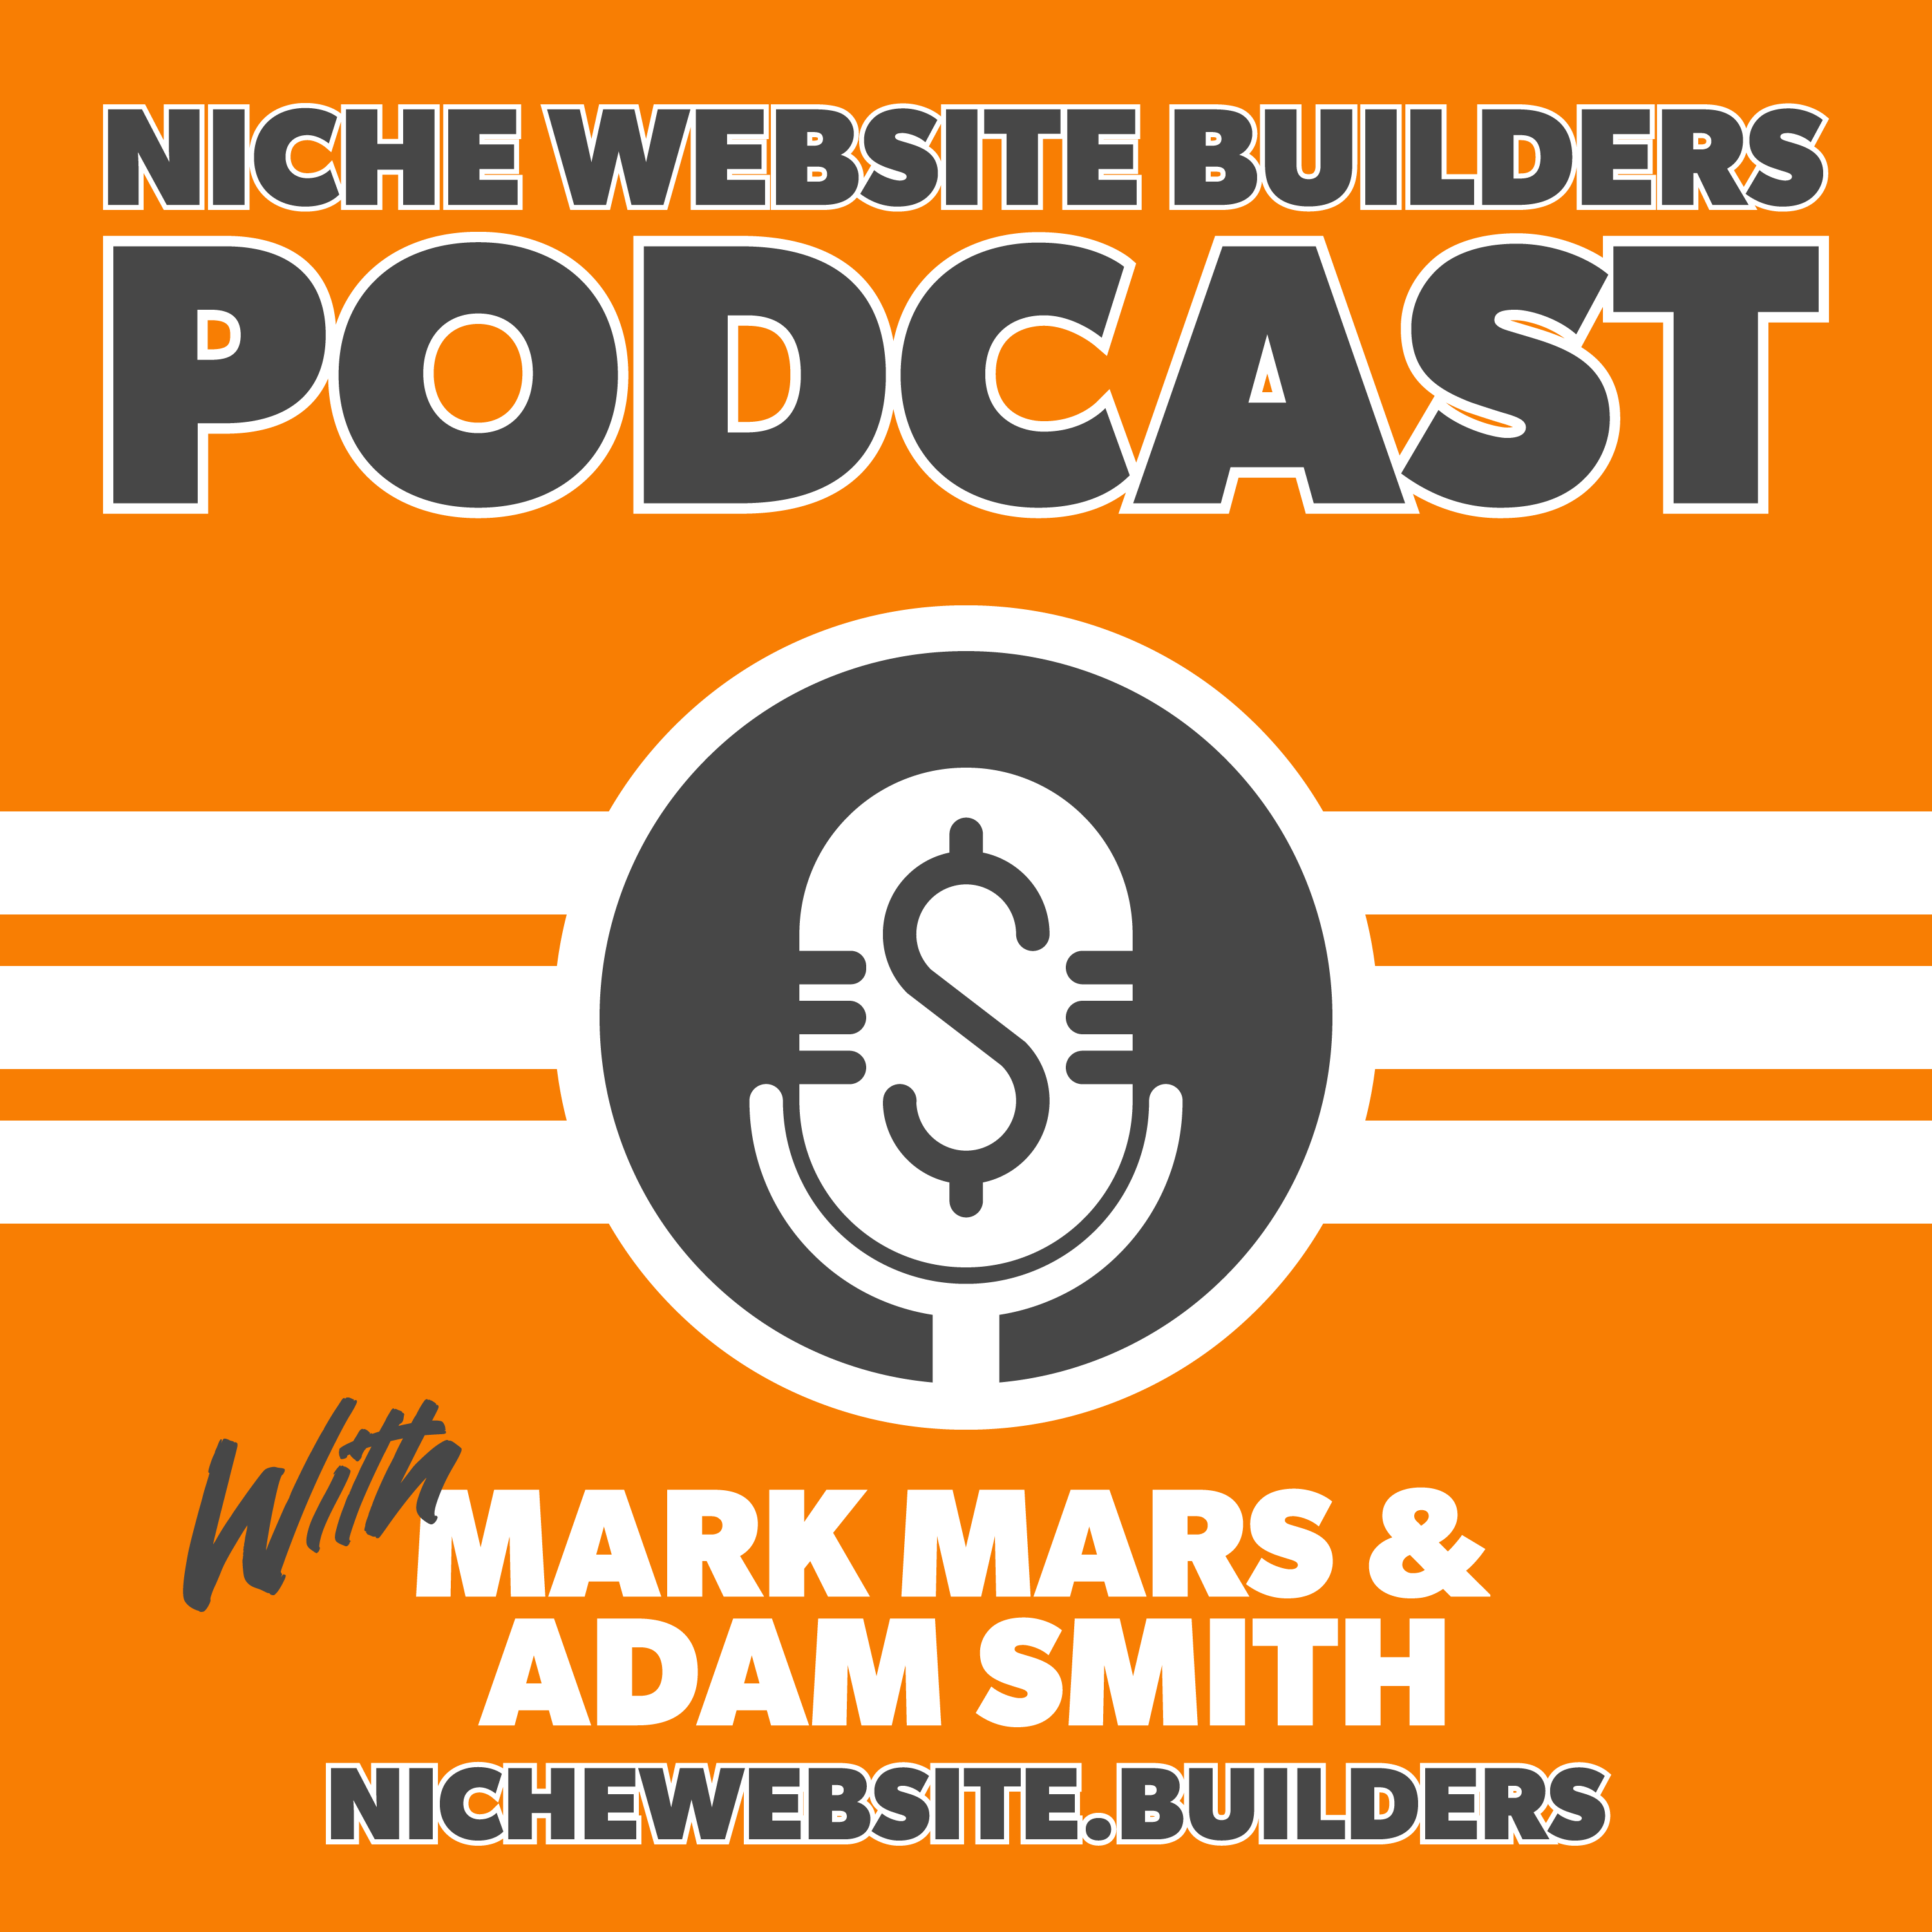 Chris Palmer on 10x your traffic building mininets and busting link building myths